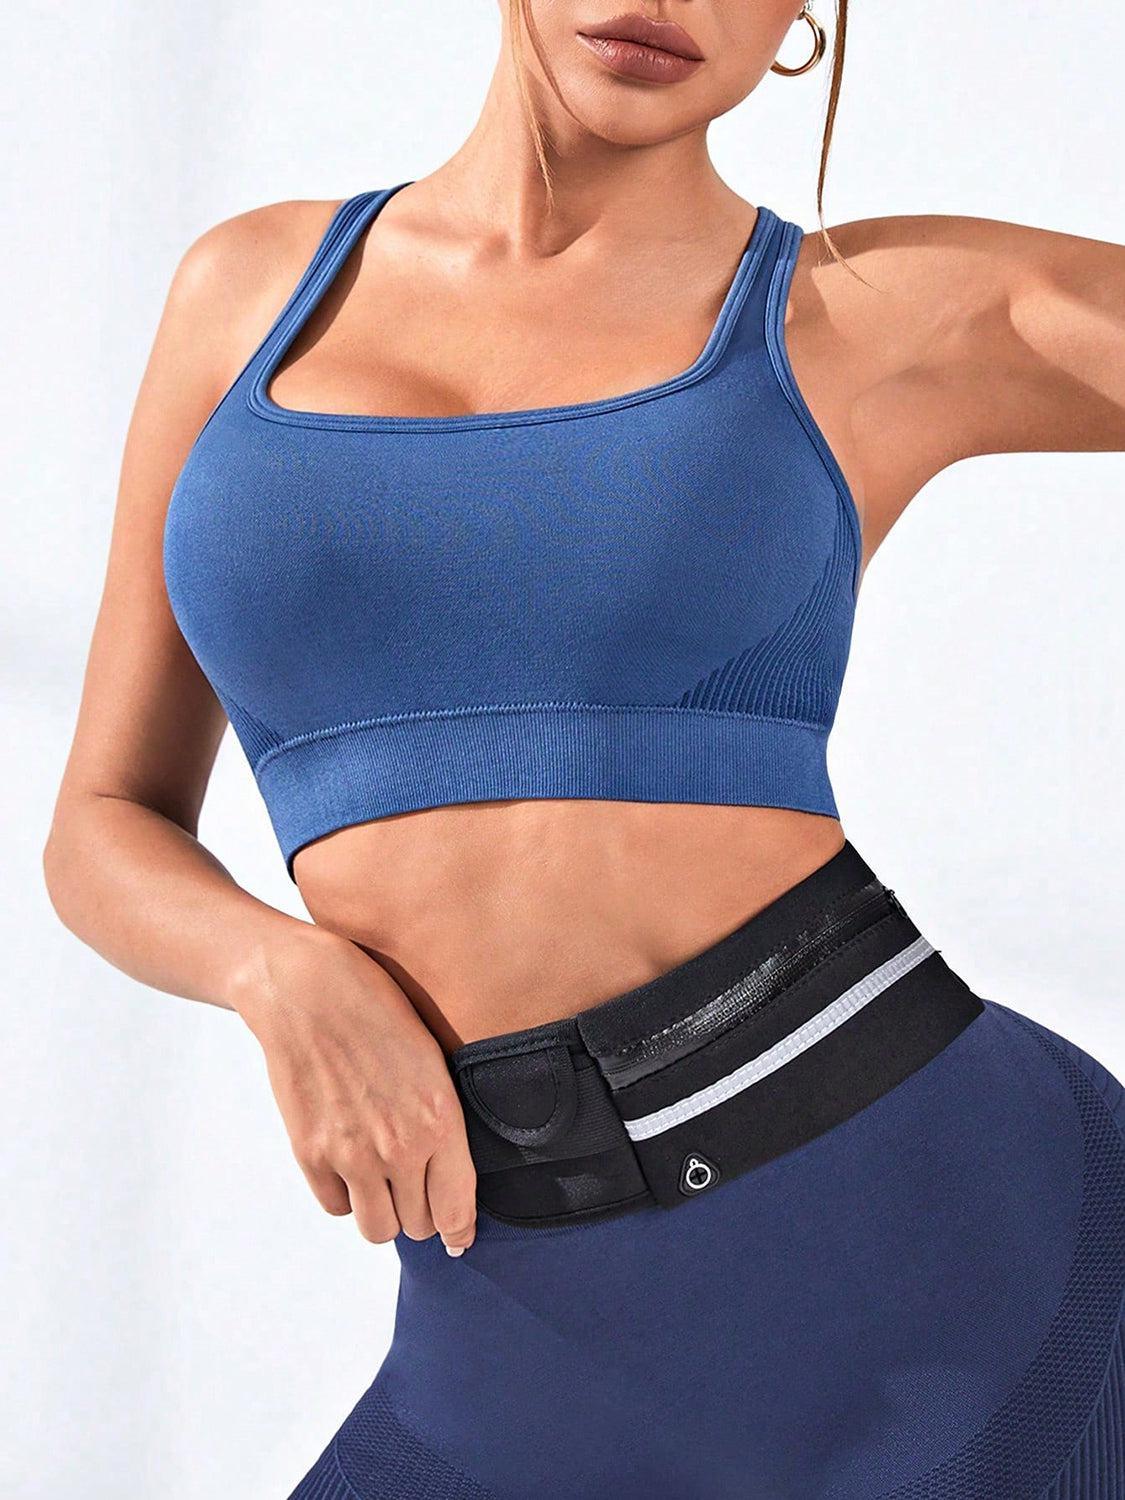 a woman in a blue sports bra top posing for a picture